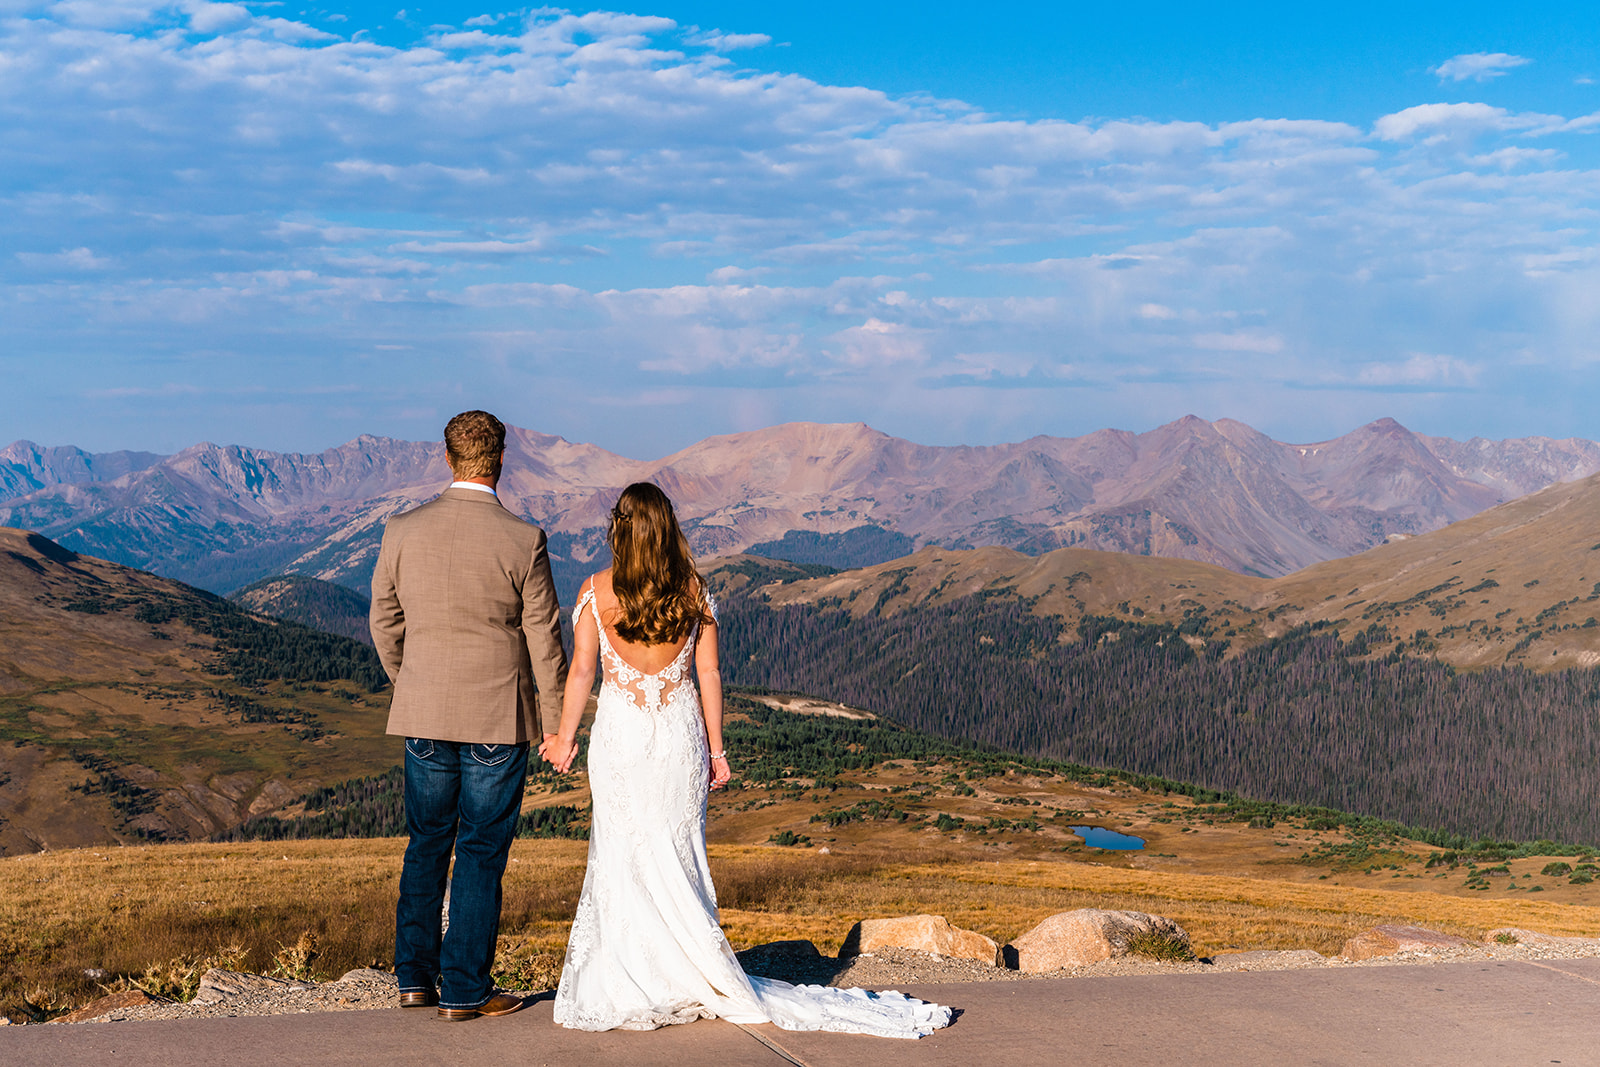 Adventure elopement day with dreamy backdrops and mountain views in Colorado